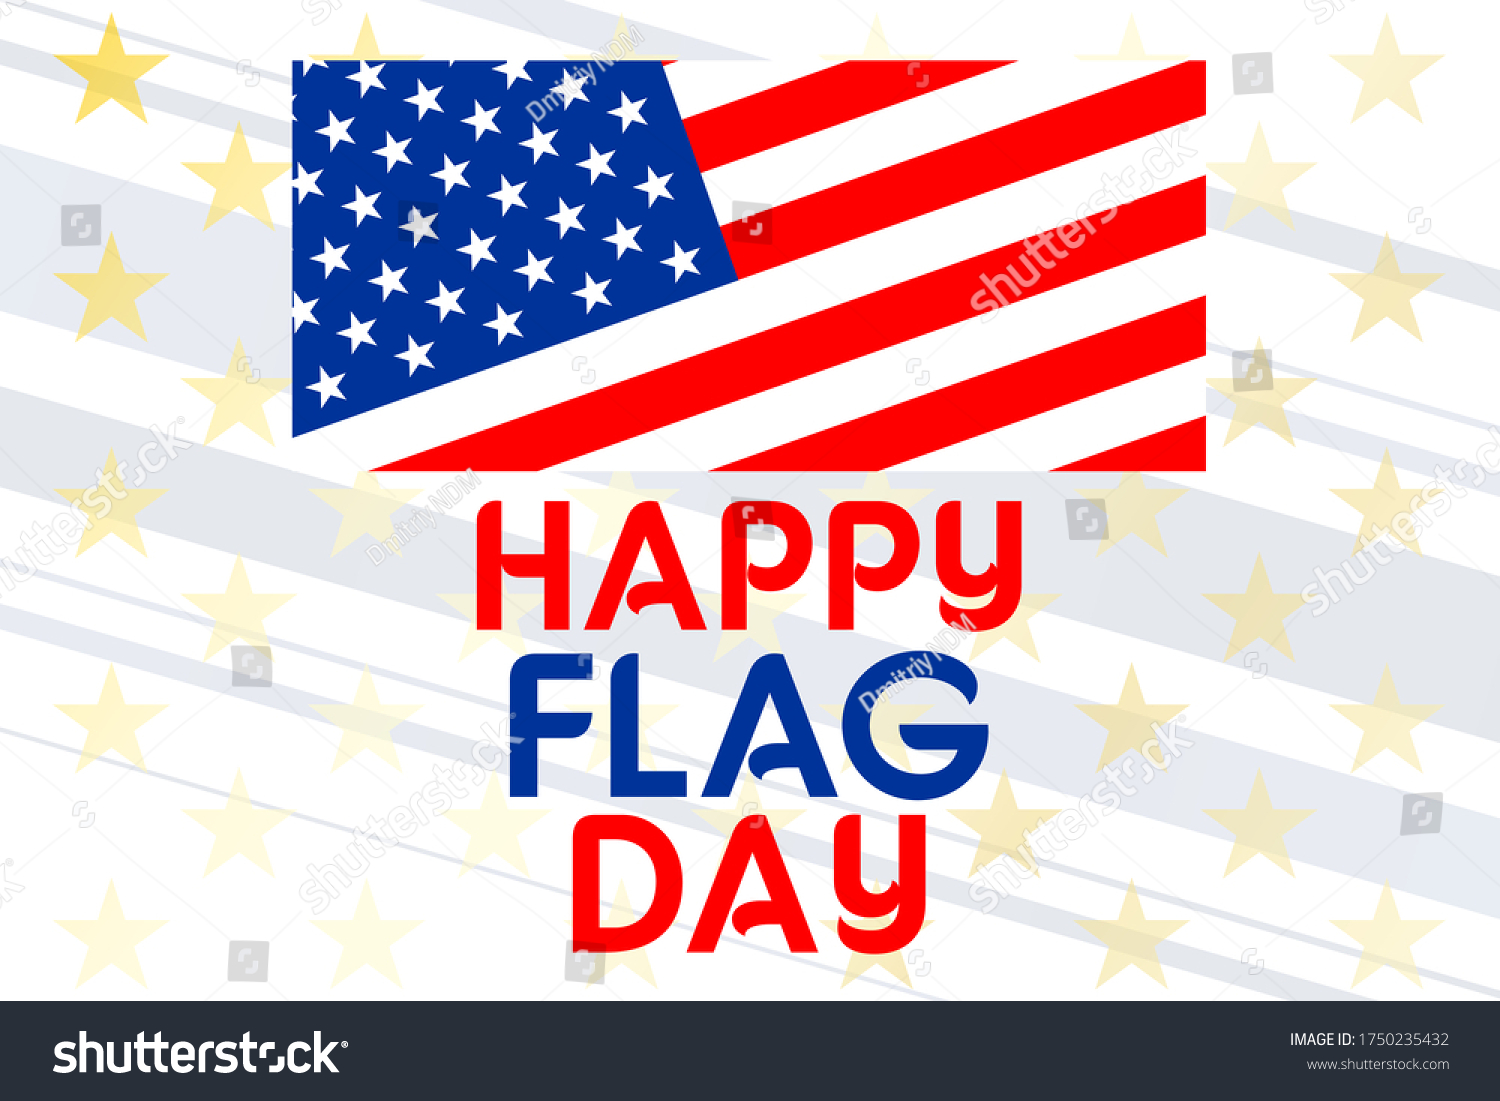 SVG of Flag Day June 14. It commemorates the adoption of the flag of the United States on June 14, 1777 by resolution of the Second Continental Congress. Poster, banner, background design. Vector eps 10 svg